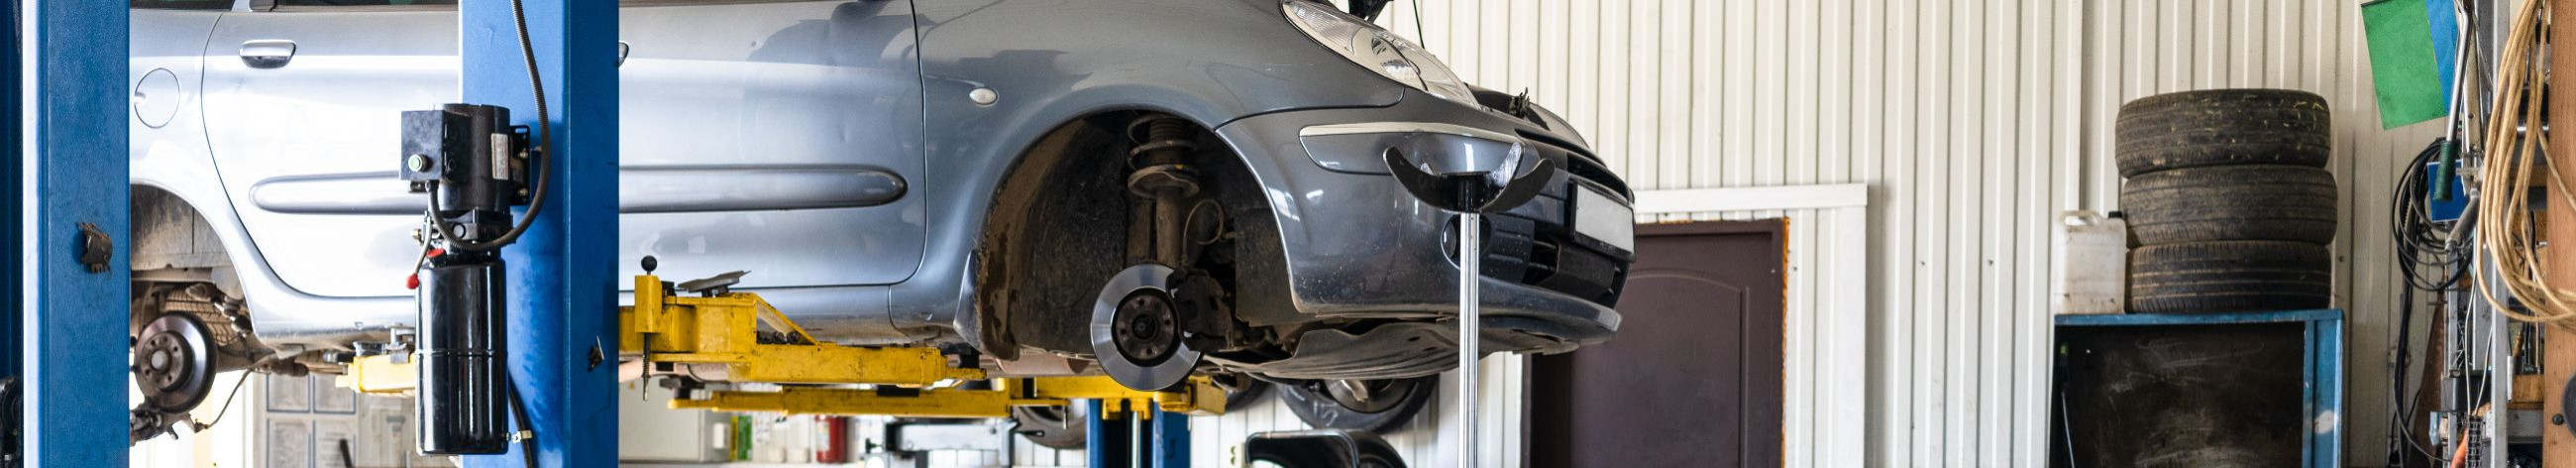 motor recovery, car chassis repair shops, alignment and balancing of wheels, suspension repair and maintenance, repair of brake system, maintenance services for rolling stock, overheating solutions, oil leak corrections, correcting scratches, suspension repair